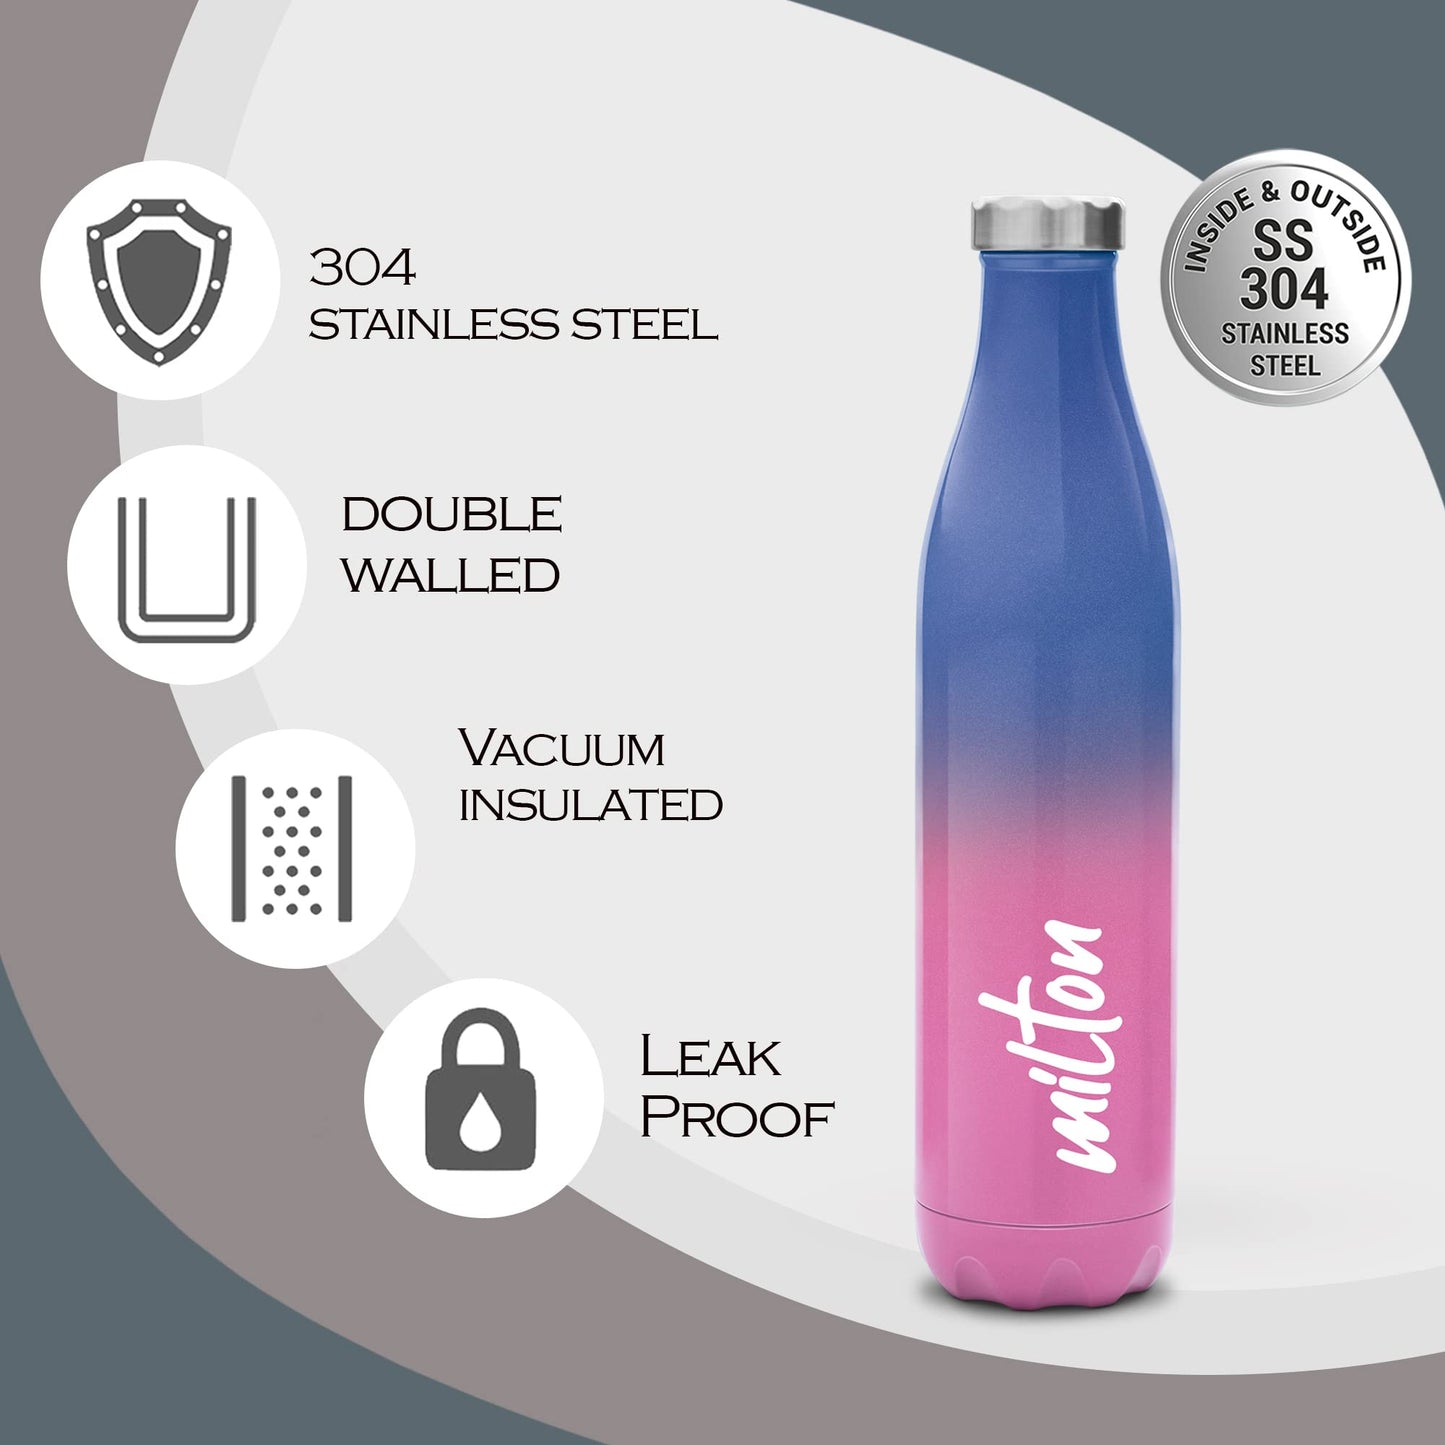 Milton Prudent 500 Thermosteel 24 Hours Hot and Cold Water Bottle, 510 ml, Pink Blue | Leak Proof | Easy to Carry | Office Bottle | Hiking | Trekking | Travel Bottle | Gym | Home | Kitchen Bottle